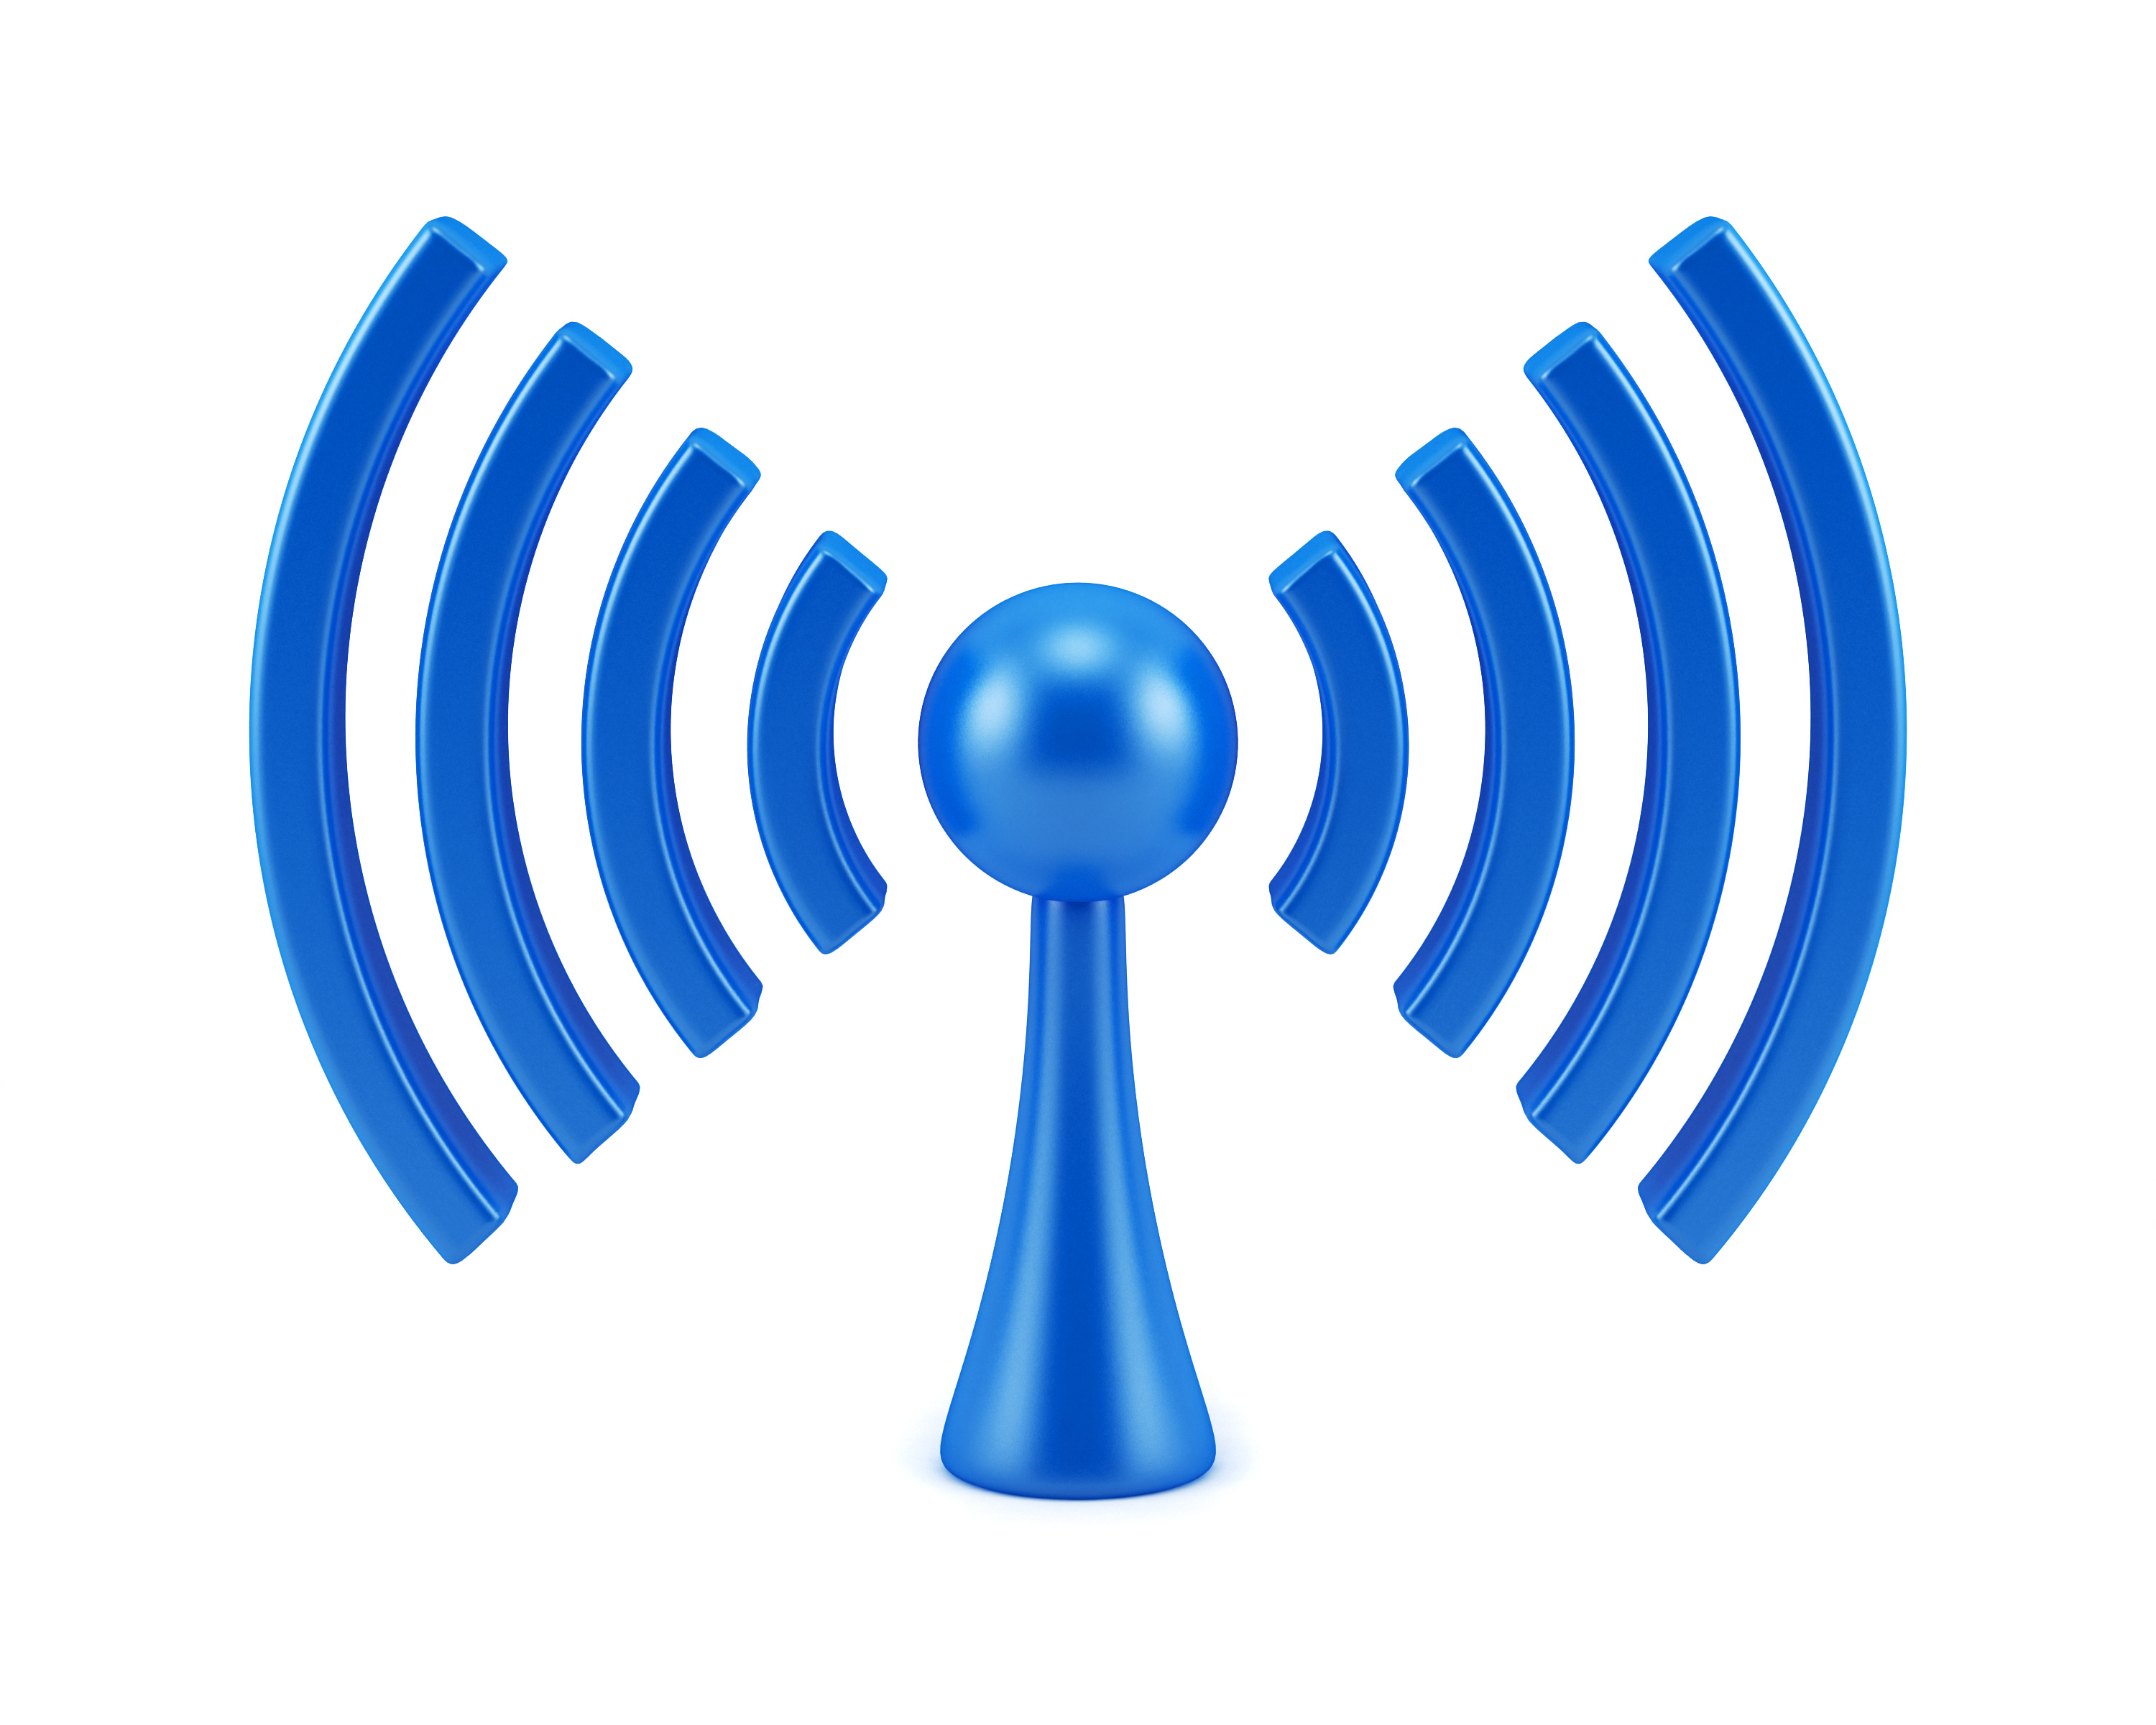 Wireless network sign. 3D symbol isolated